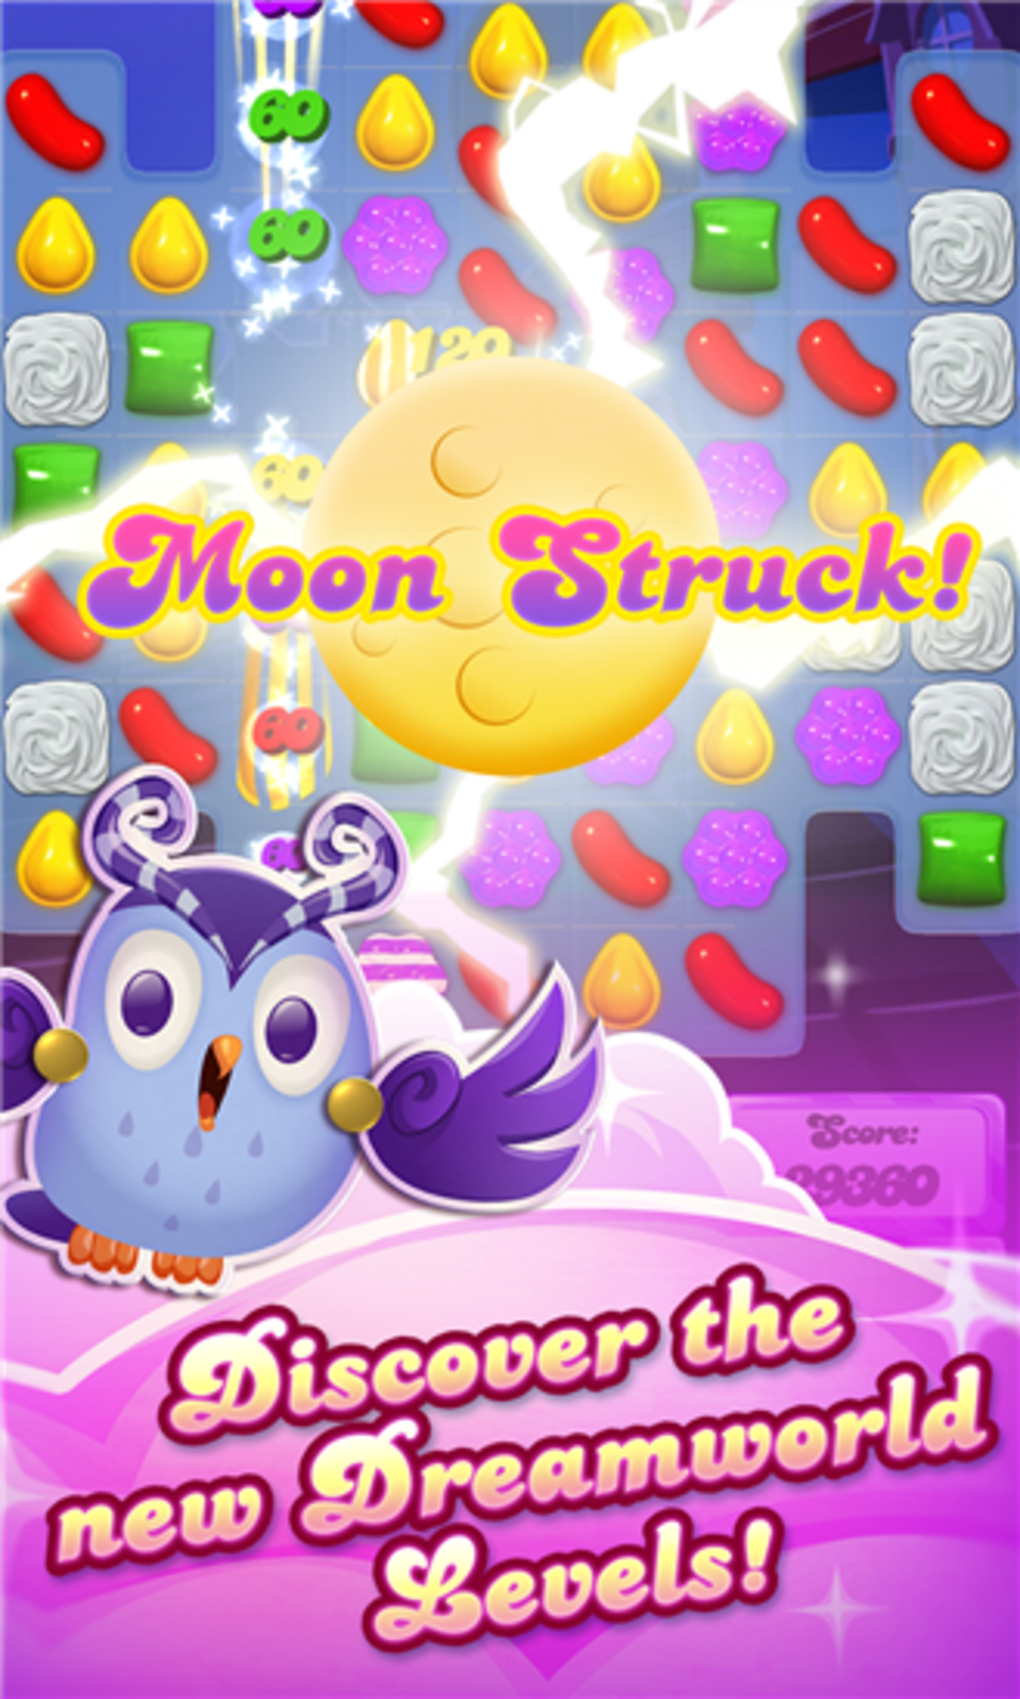 Candy Crush Saga (GameLoop) for Windows - Download it from Uptodown for free